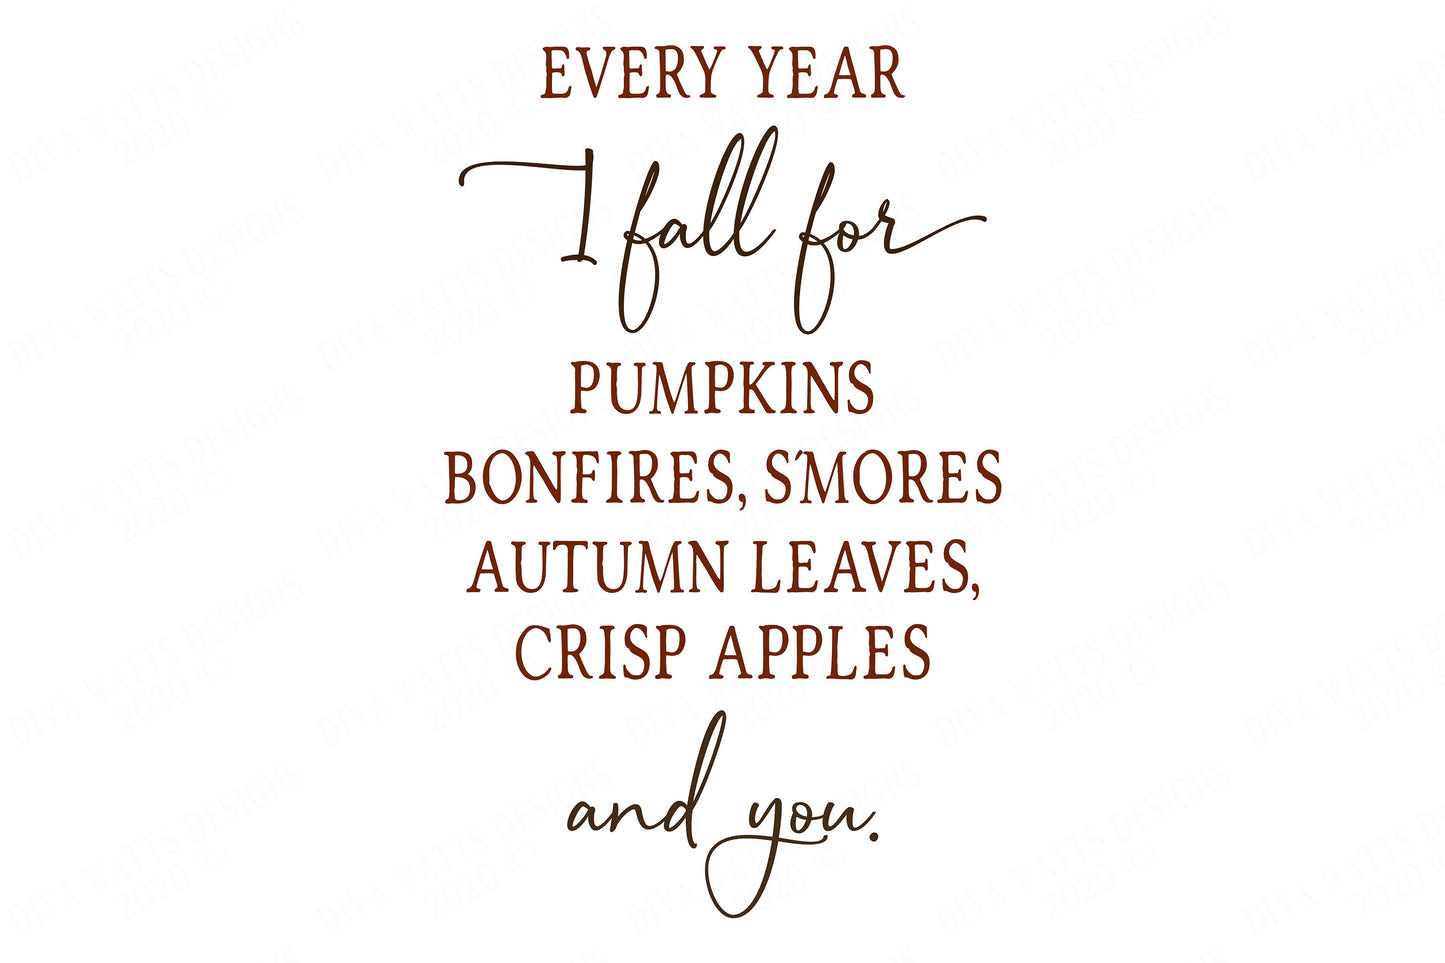 Every Year I Fall For Pumpkins, Bonfires, S'mores, Autumn Leaves, Crisp Apples and You. | Autumn Cutting File and Printable | SVG DXF JPG